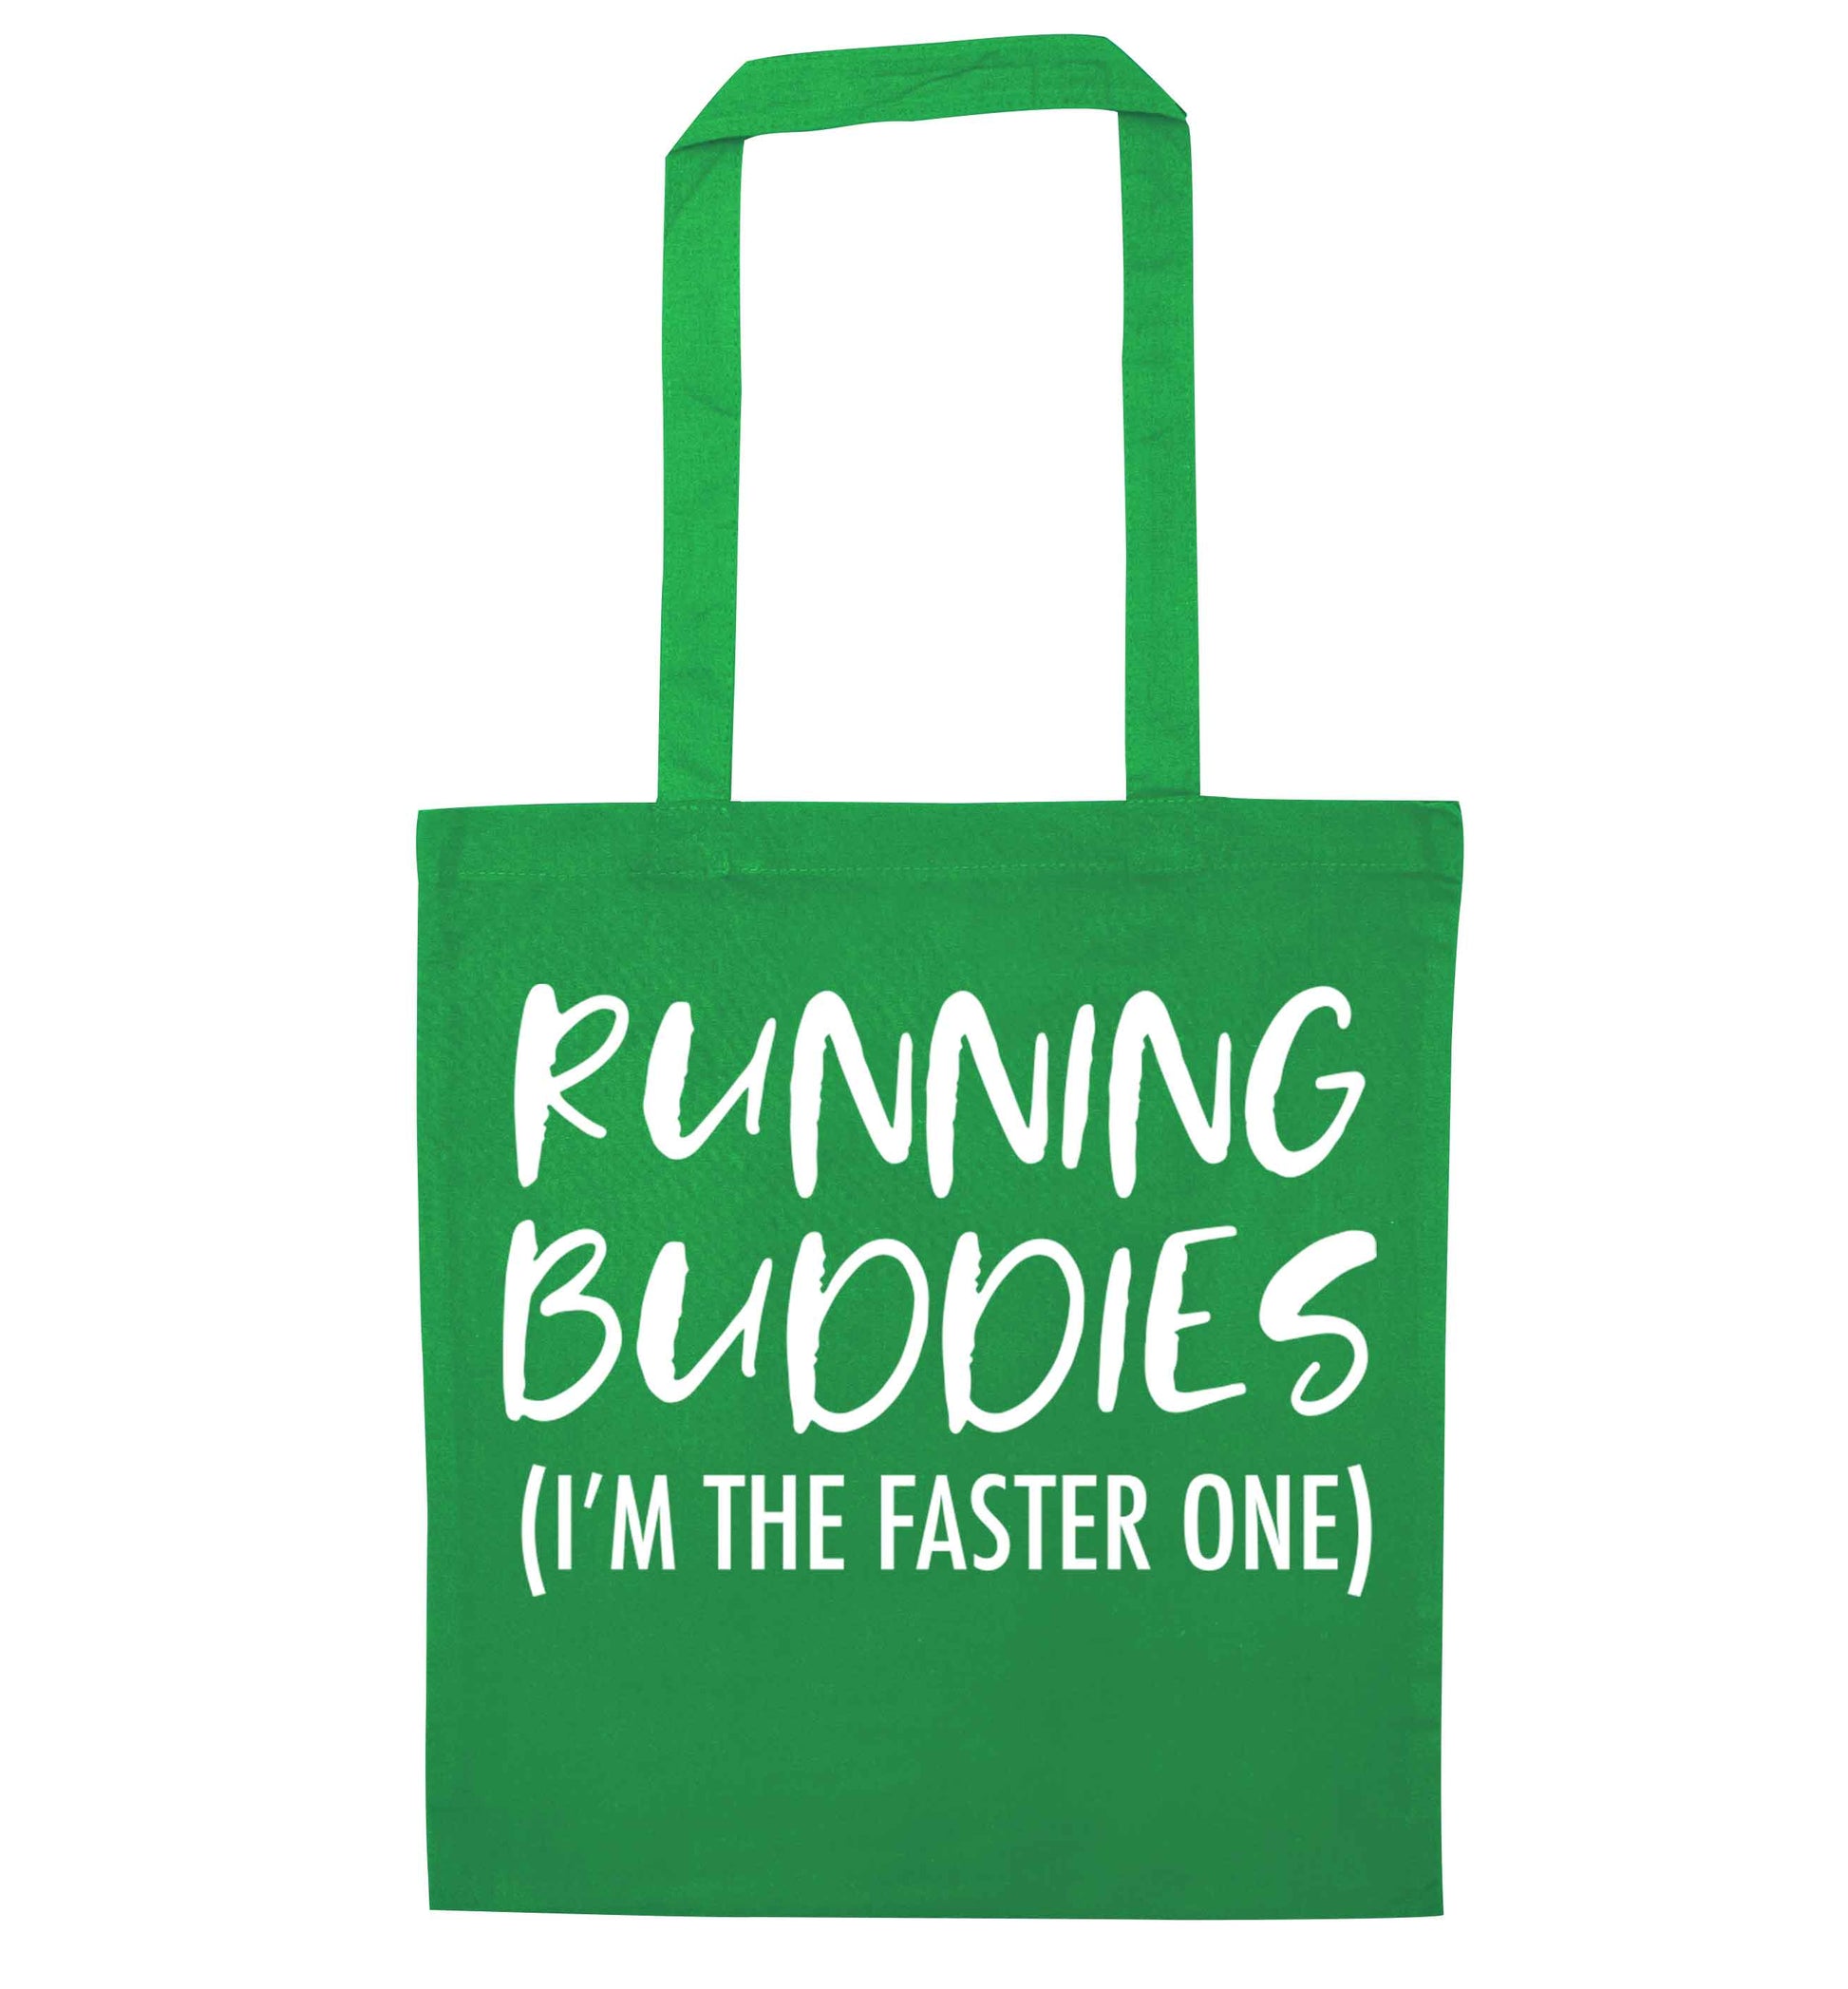 Running buddies (I'm the faster one) green tote bag